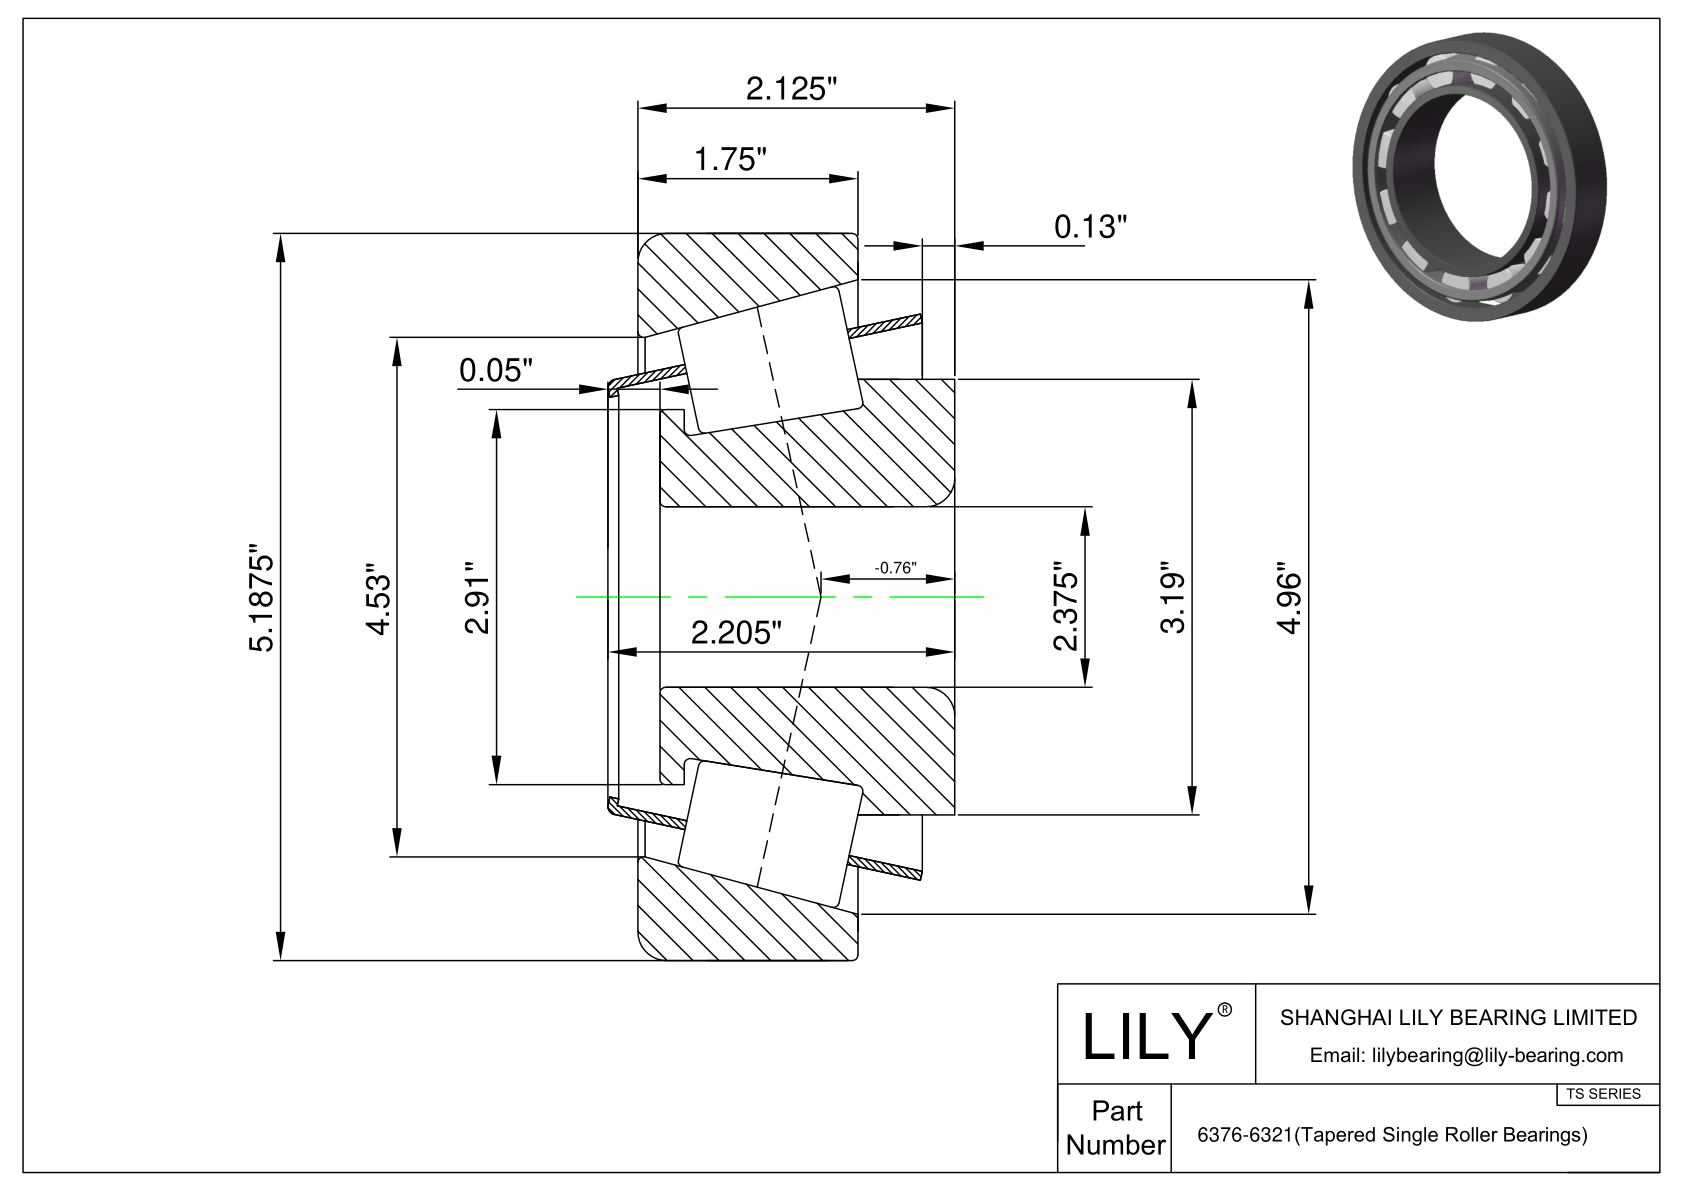 6376-6321 TS (Tapered Single Roller Bearings) (Imperial) cad drawing